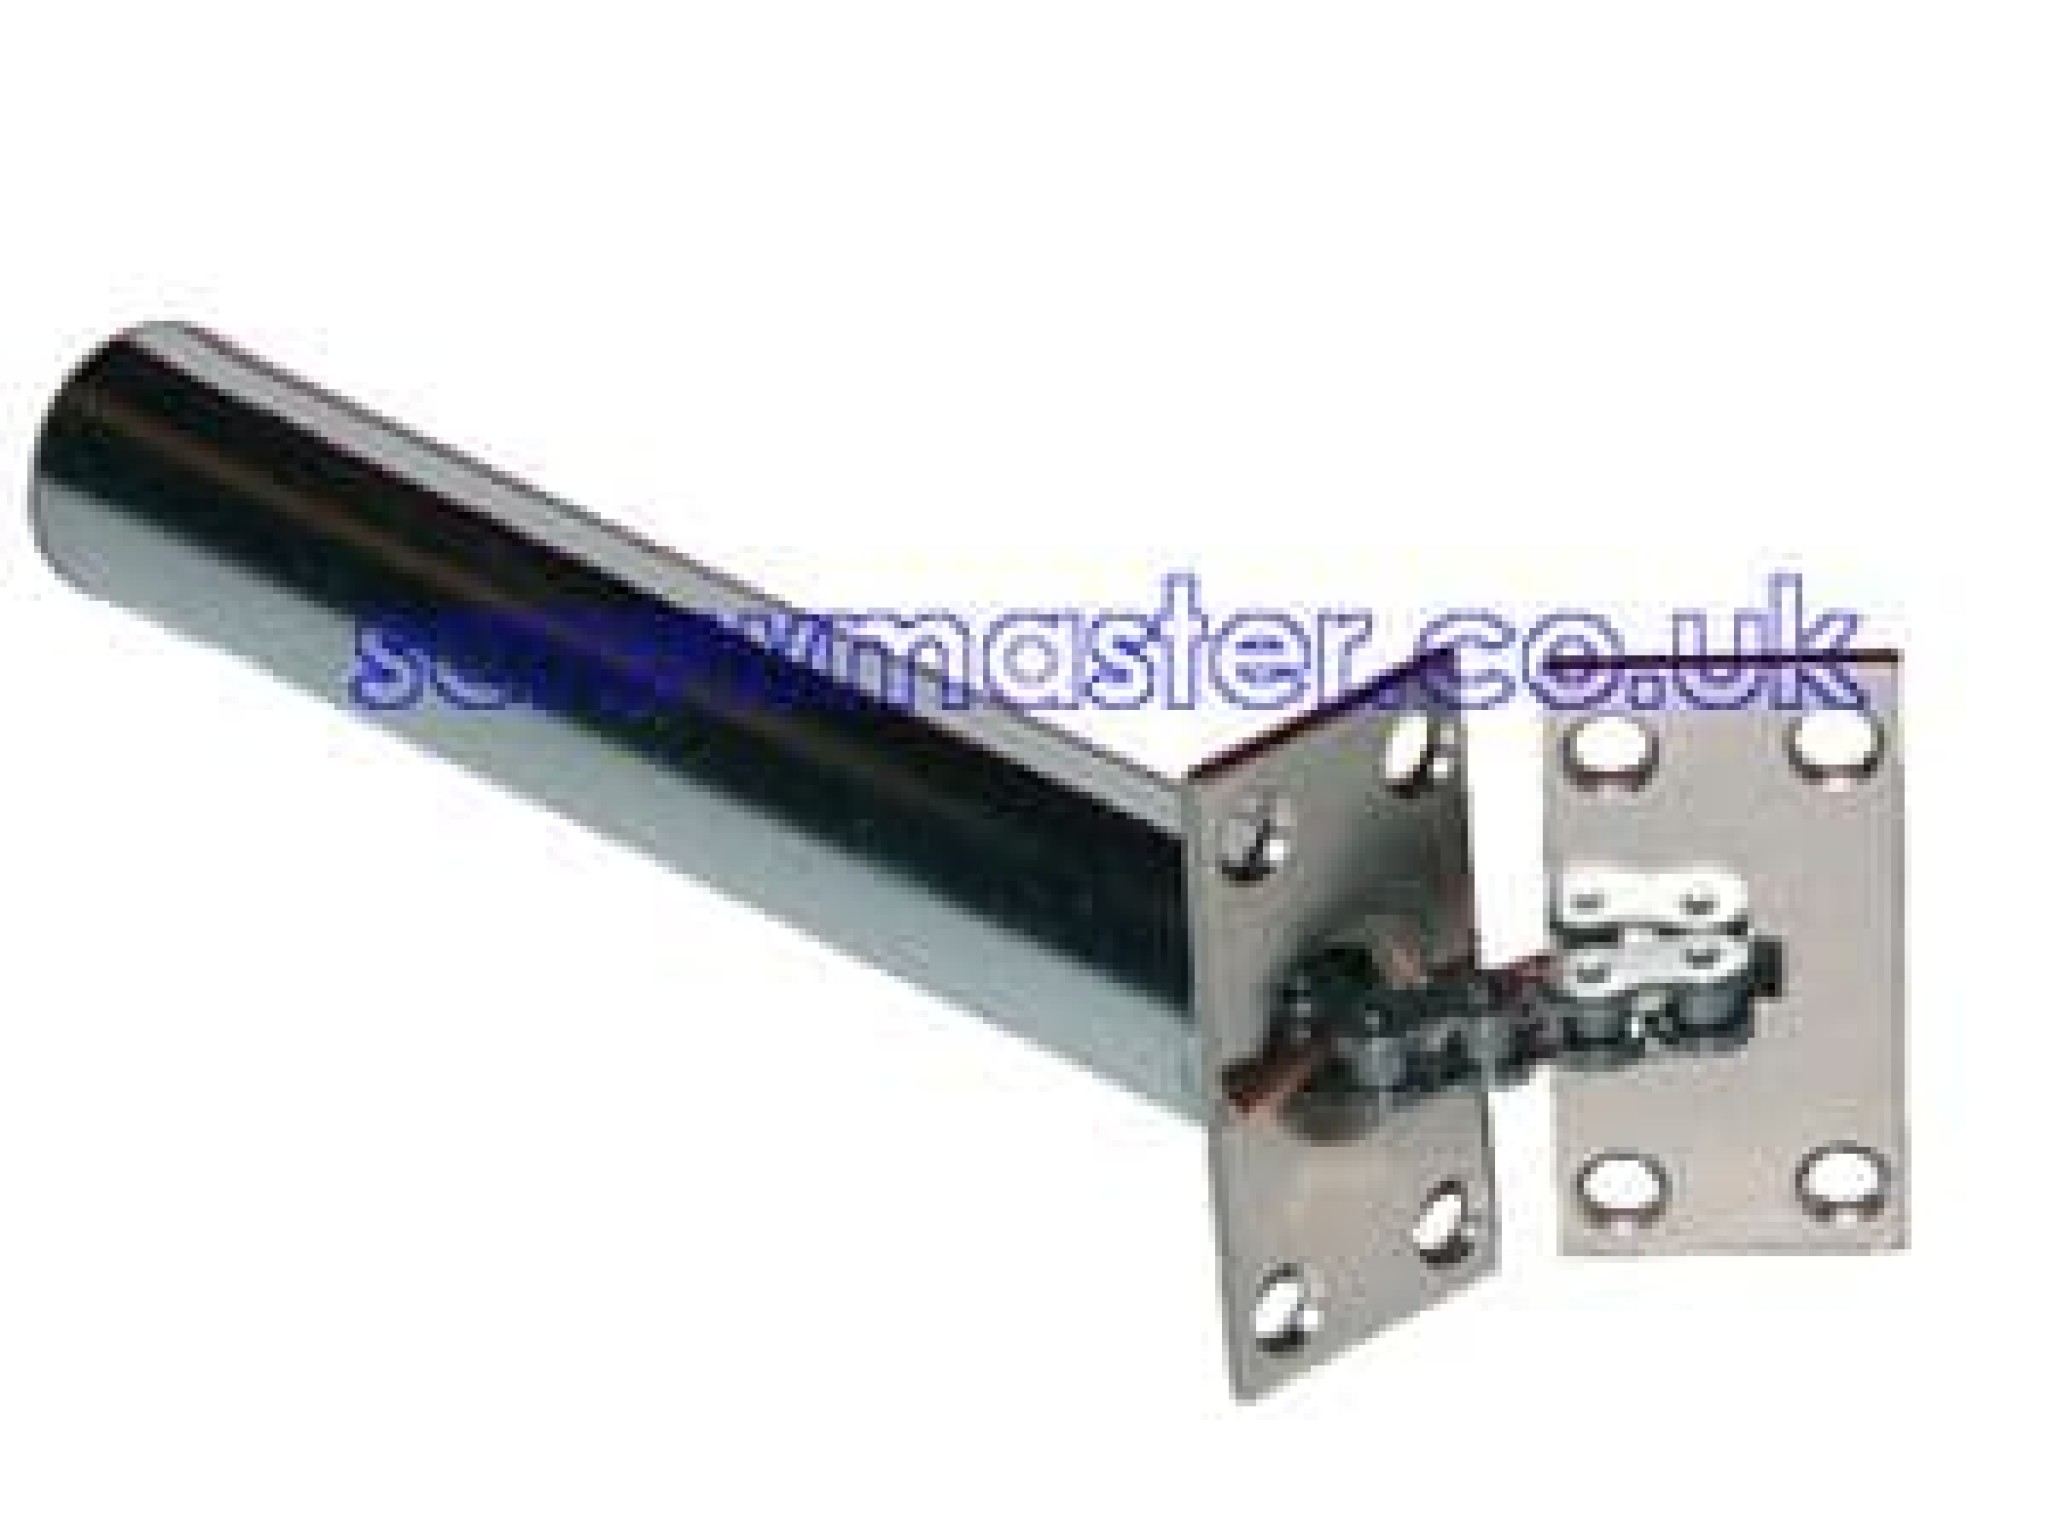 automatic-fire-door-closer-fd30-concealed-jamb-spring-operated-closer-brass-or-nickel-38-p.jpg